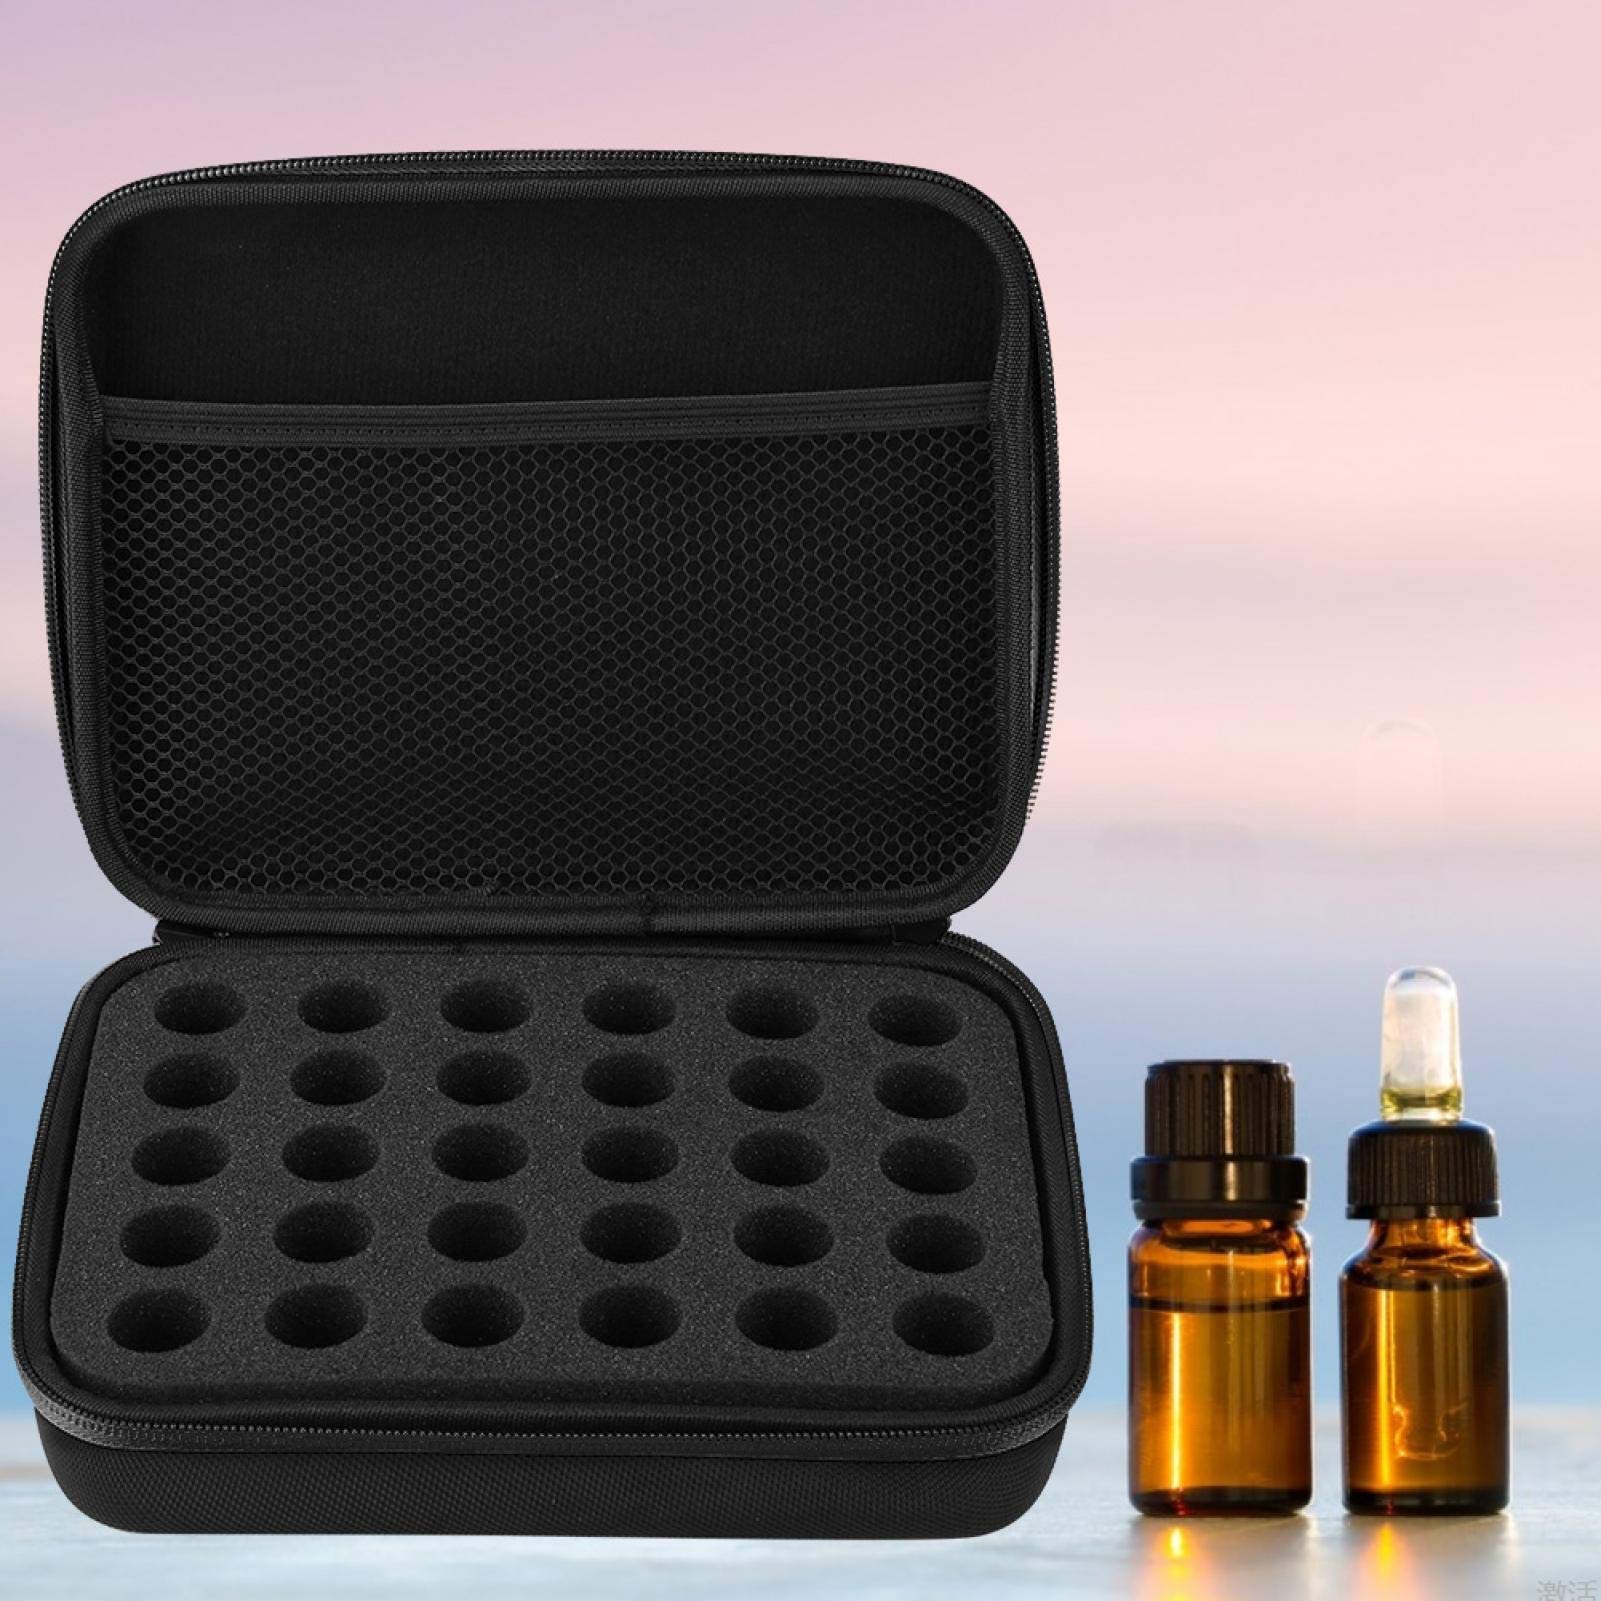 30-Bottle Essential Oil Carrying Case for 5ml,10ml,15ml with Handle Scented Oils Holder Traveling Carrying Case Storage Box(Black)